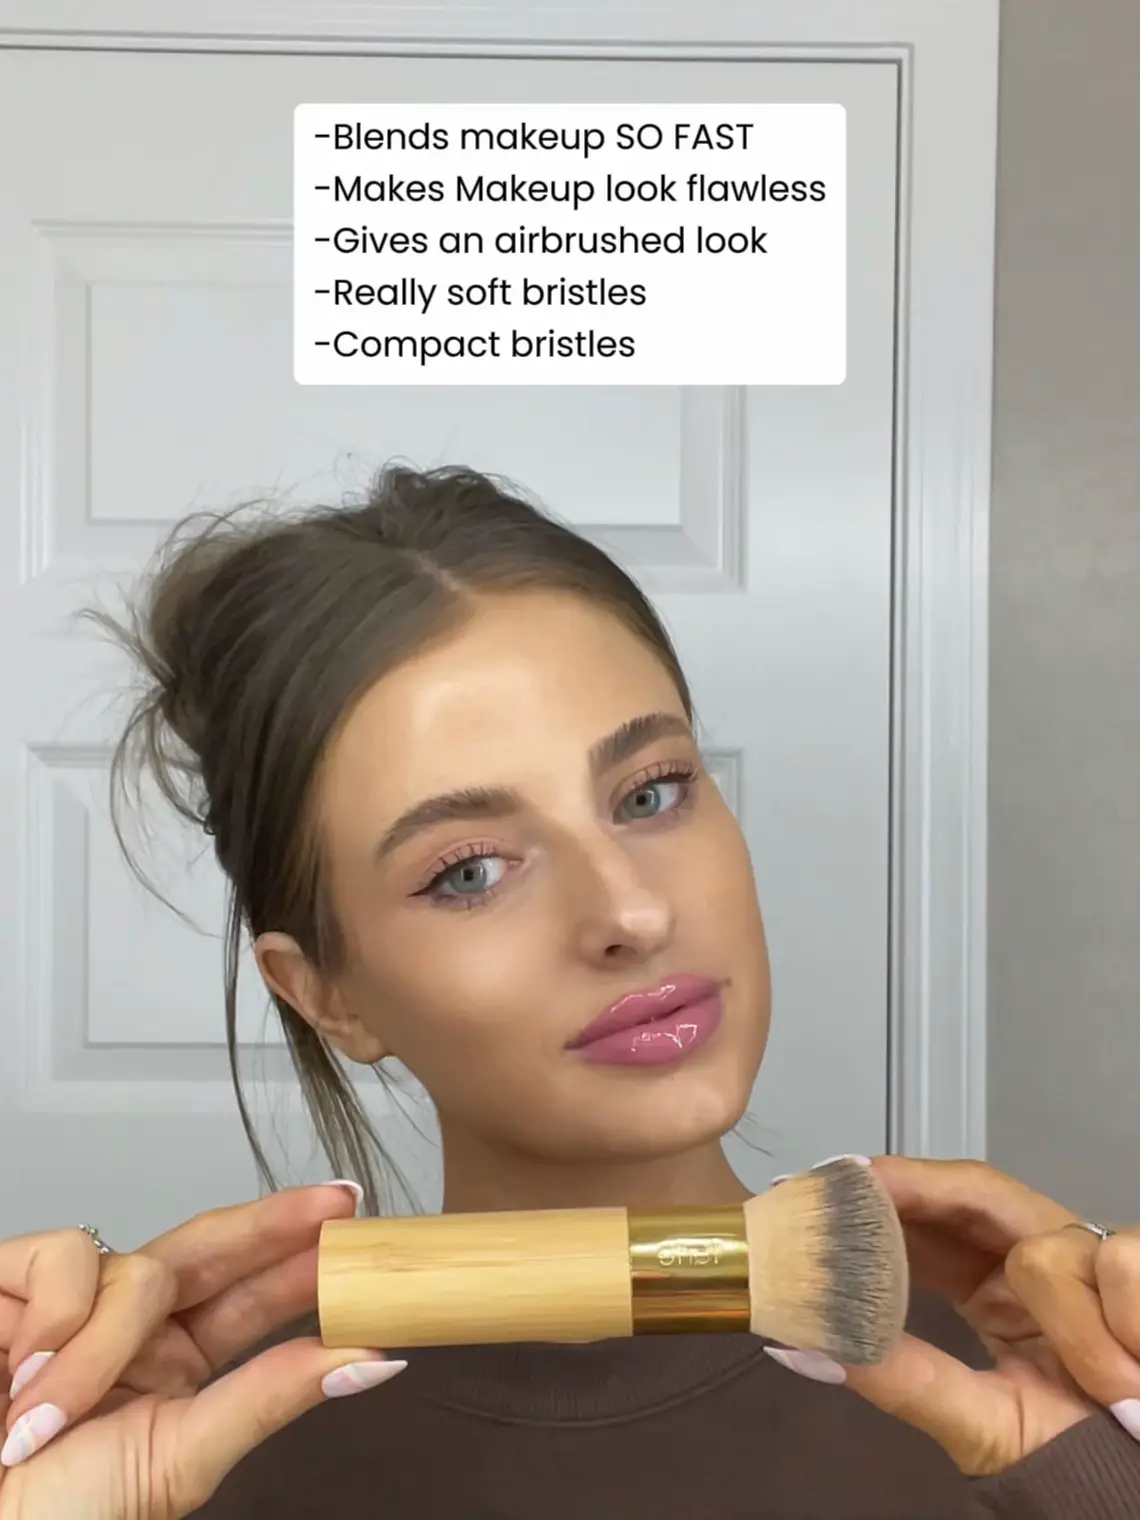  A woman is holding a makeup brush in front of her face.